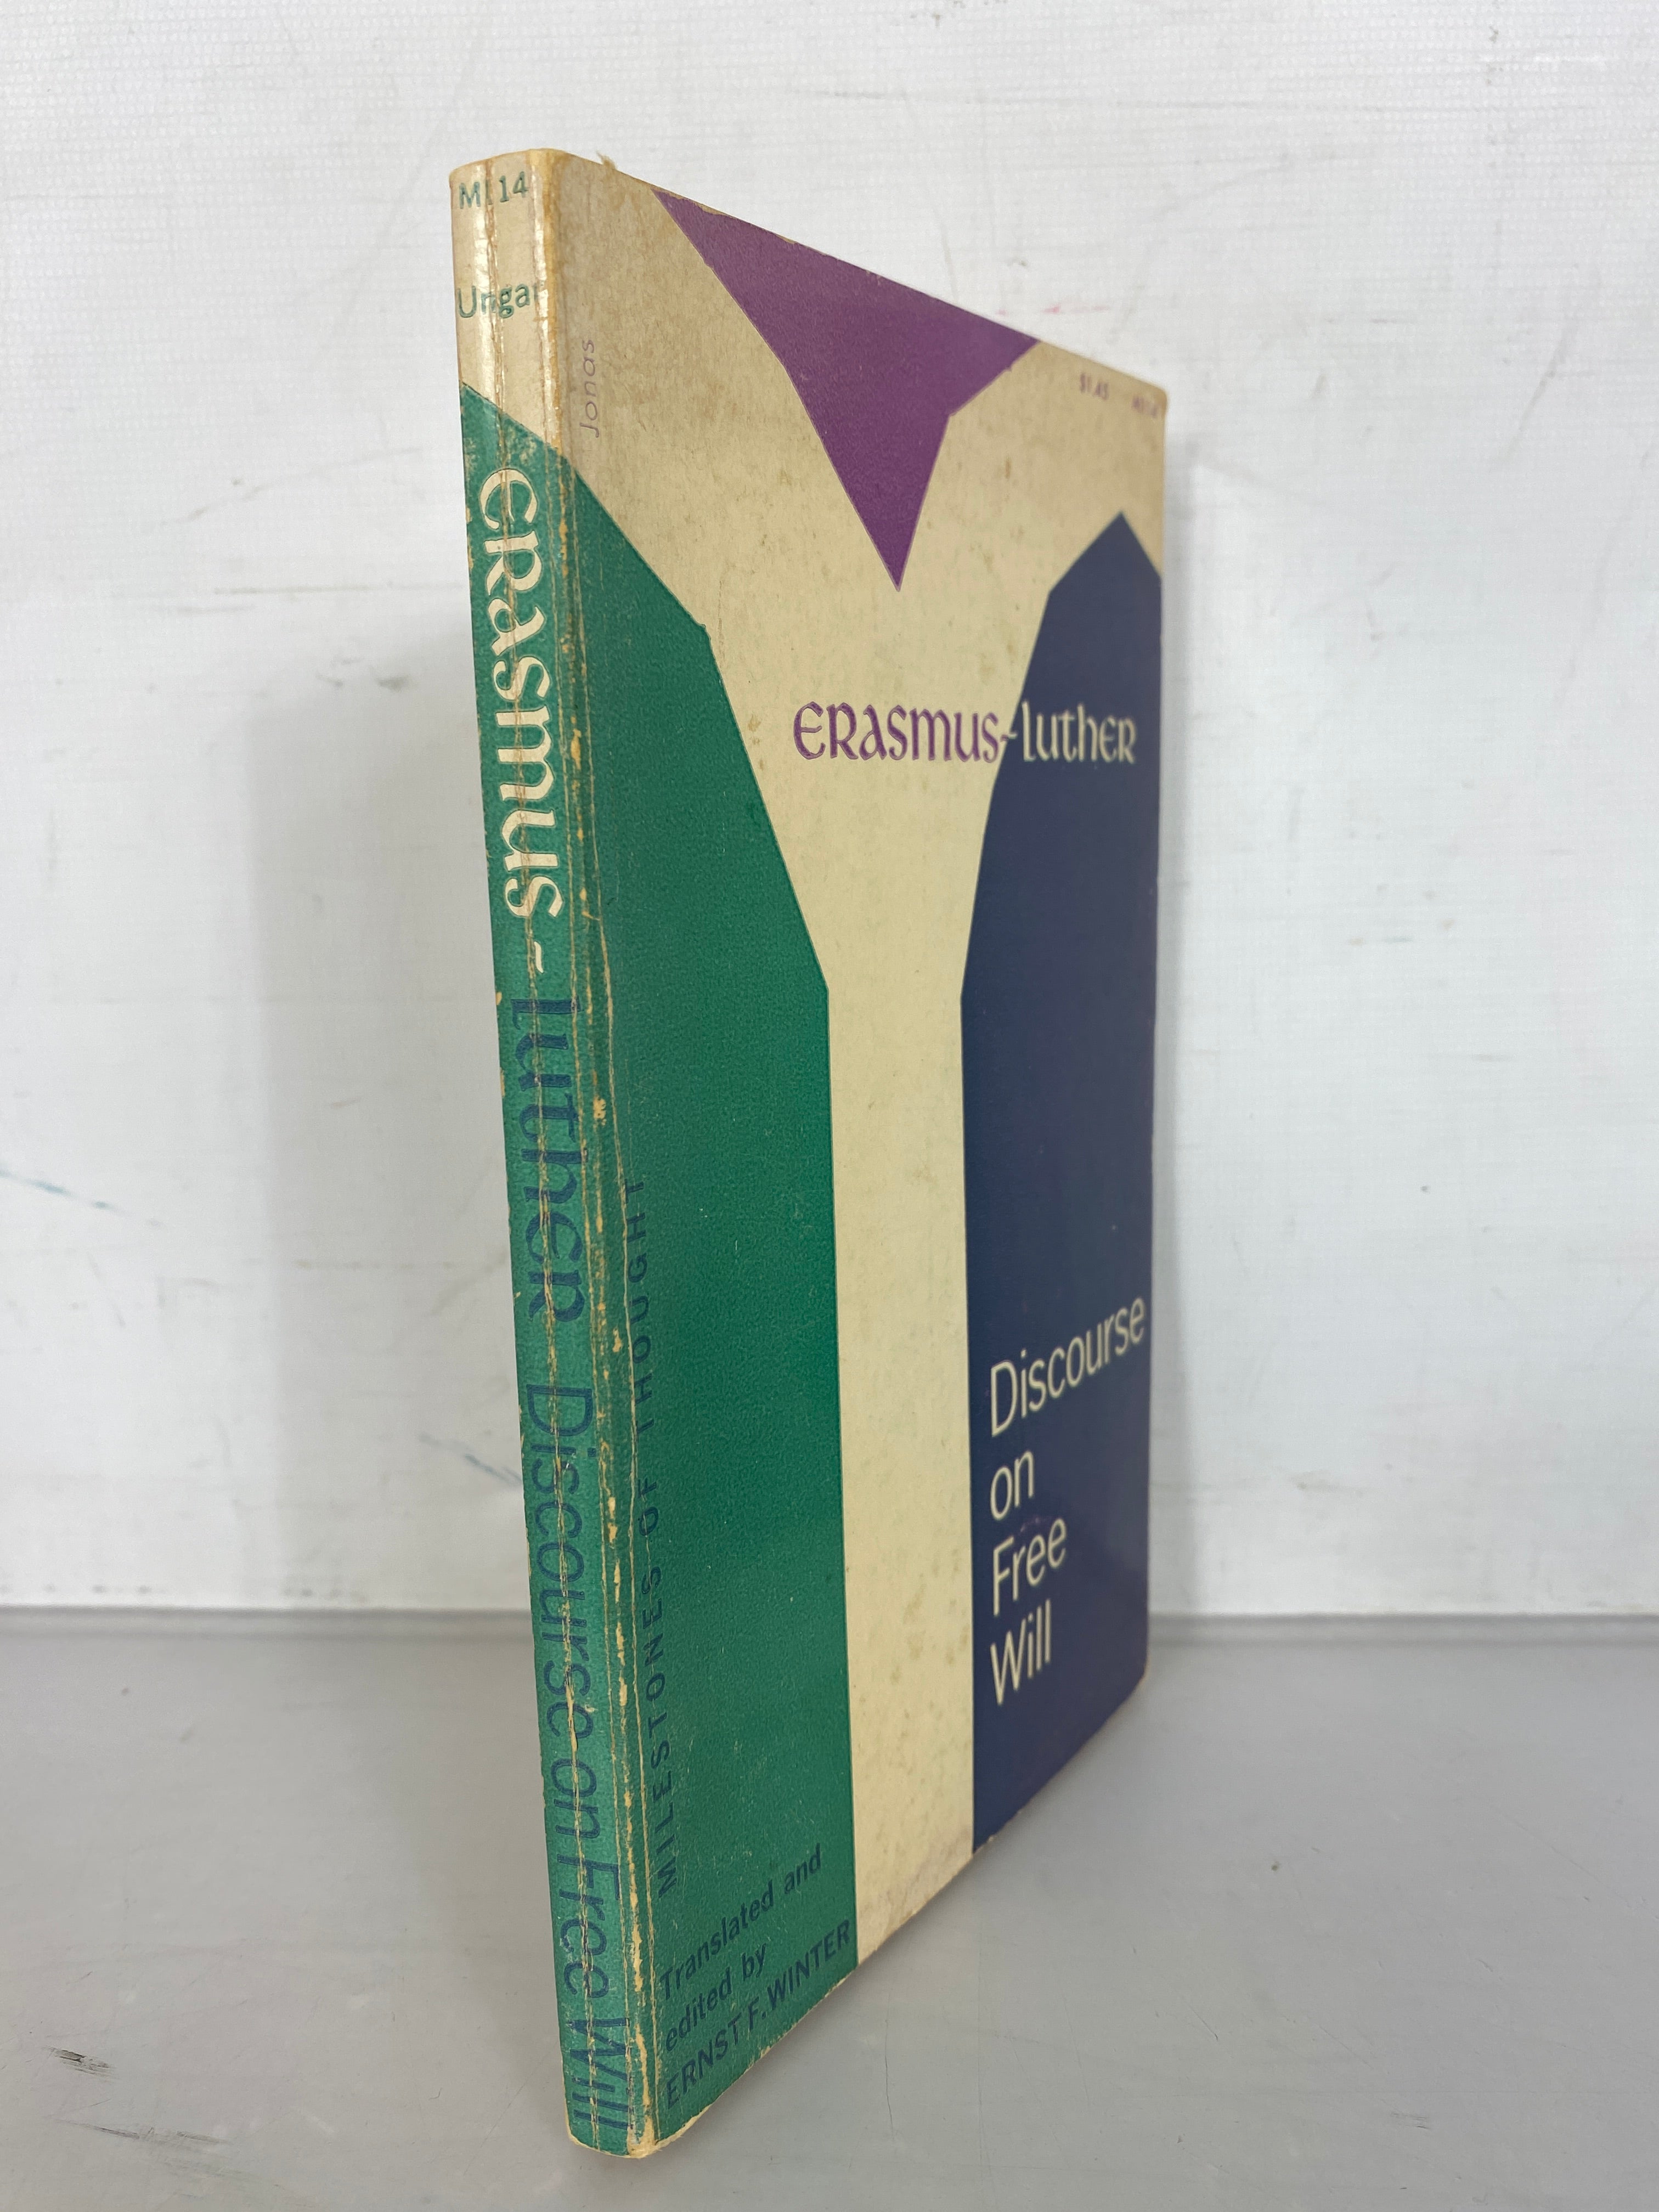 Discourse on Free Will Erasmus-Luther Translated by Ernst Winter 1961 Third Printing SC